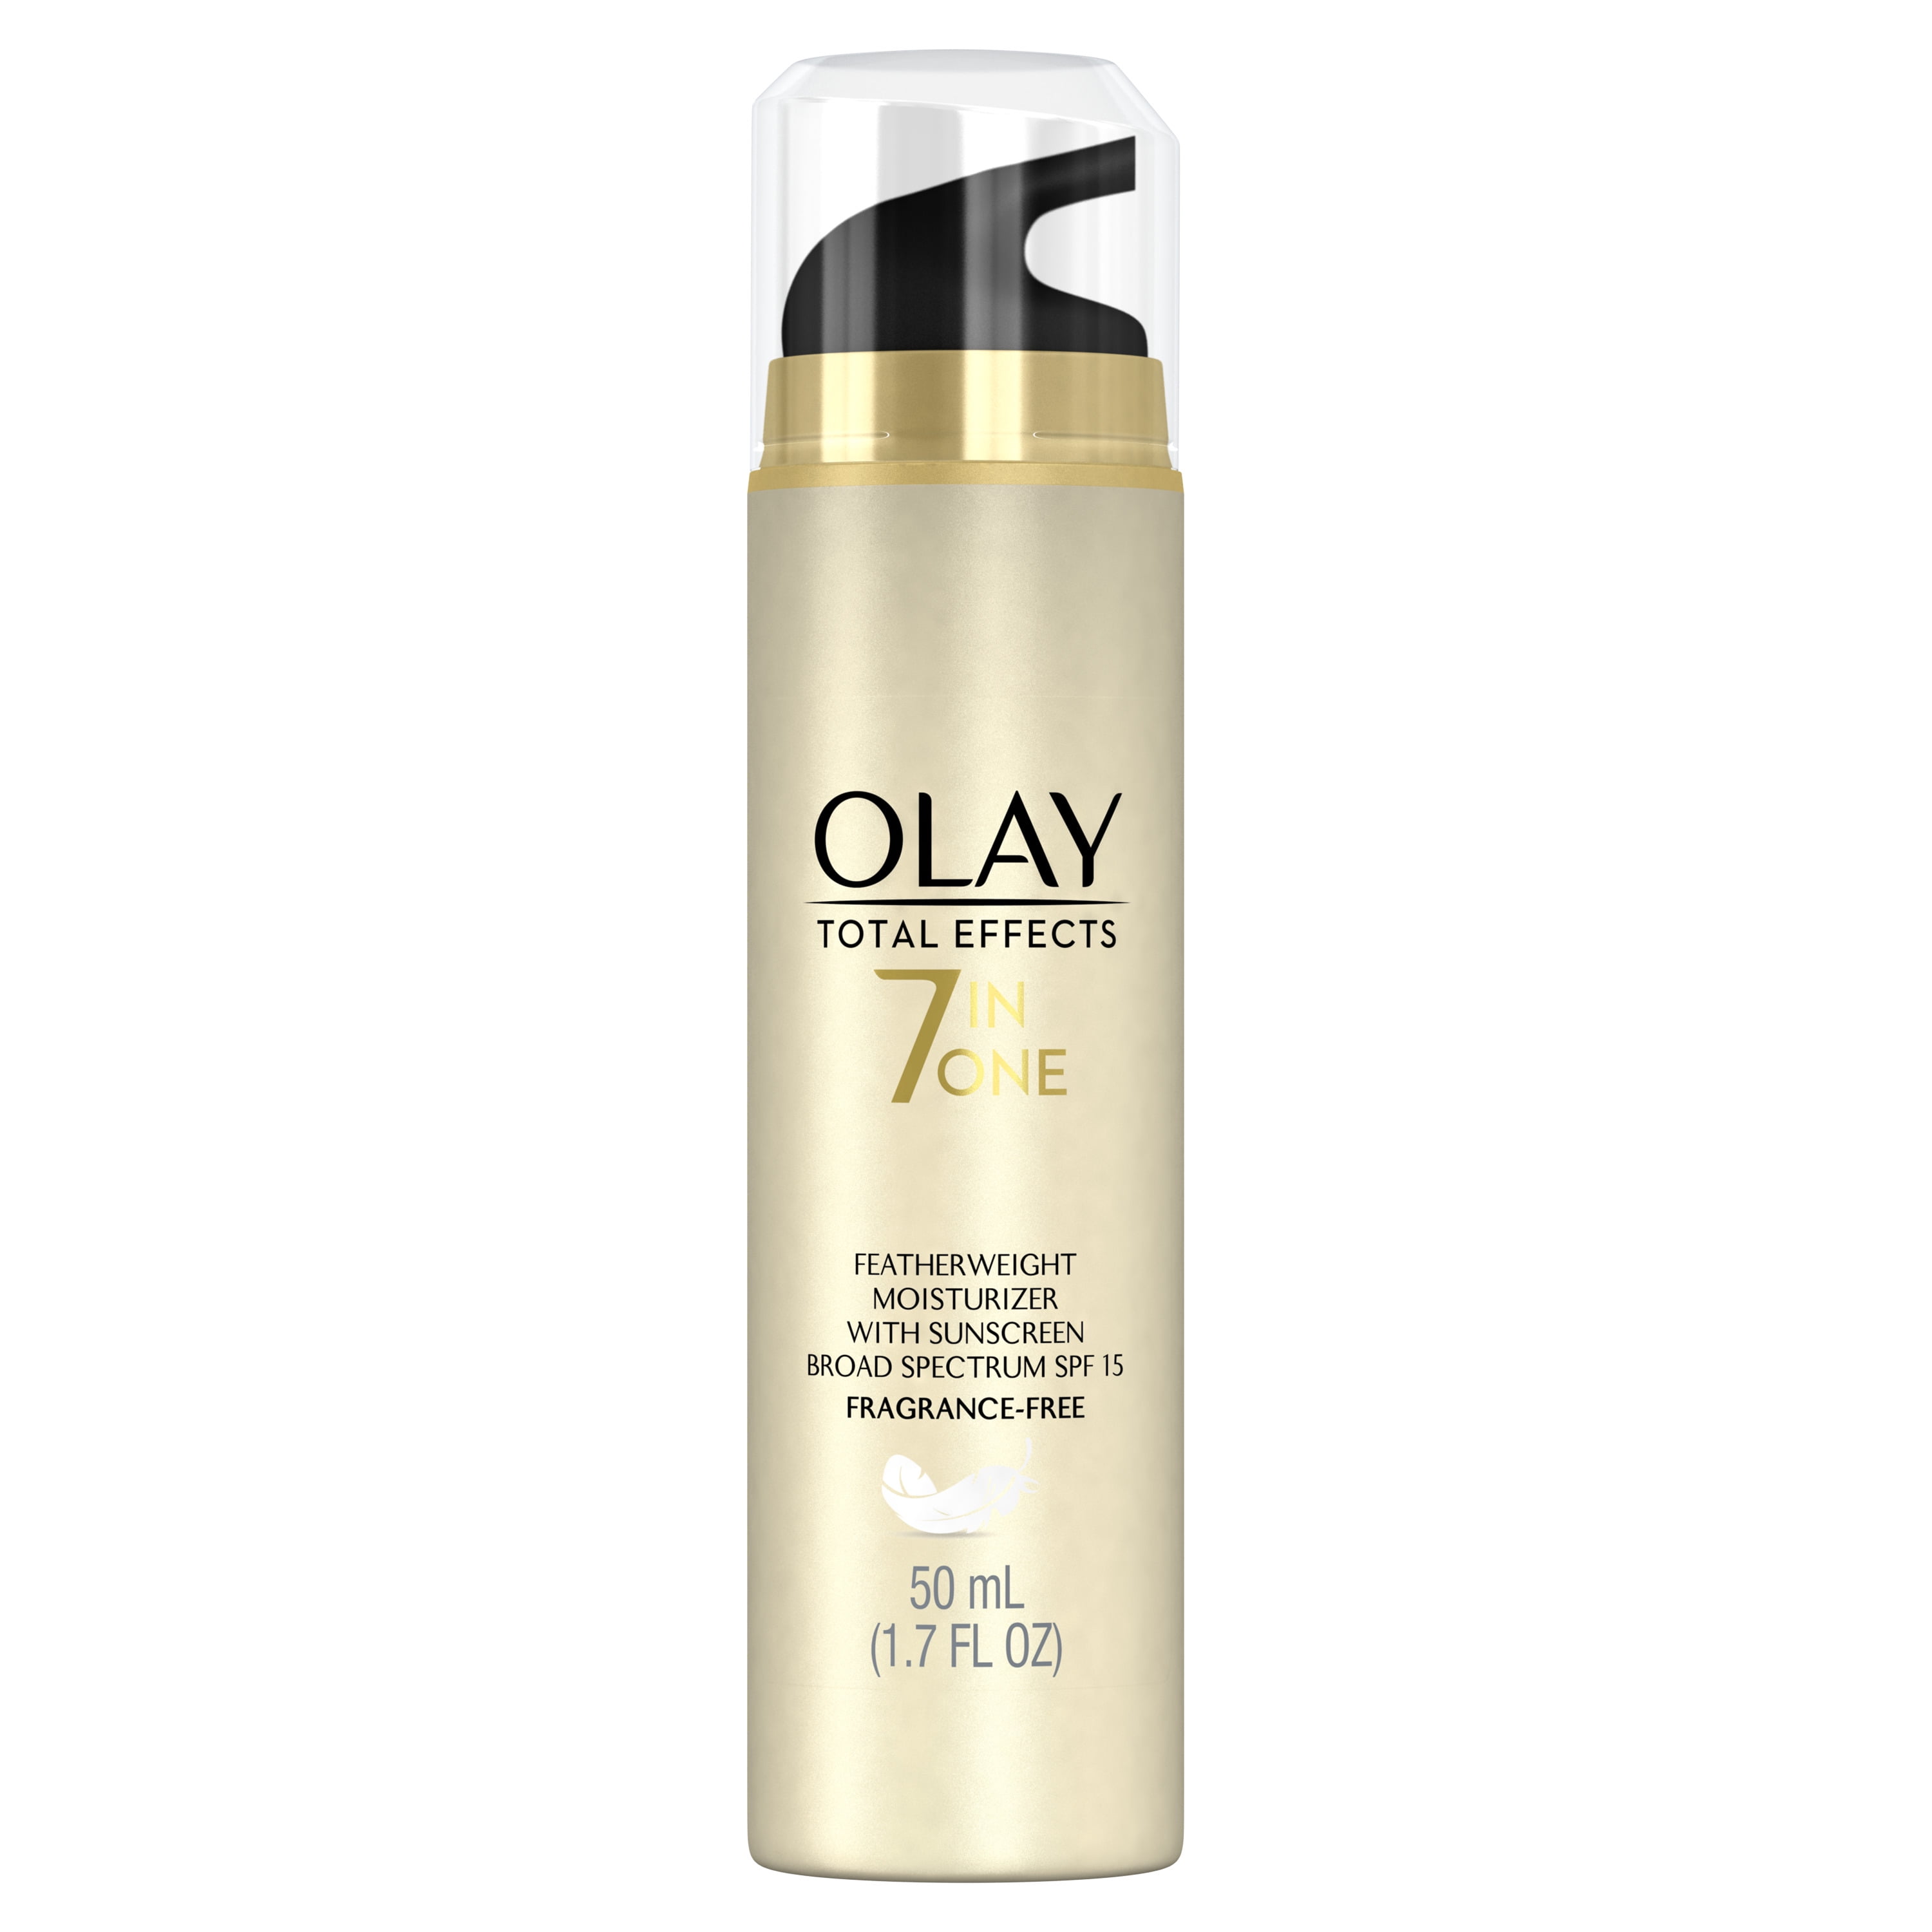 Olay Total Effects Fragrance Free Featherweight Face Moisturizer With